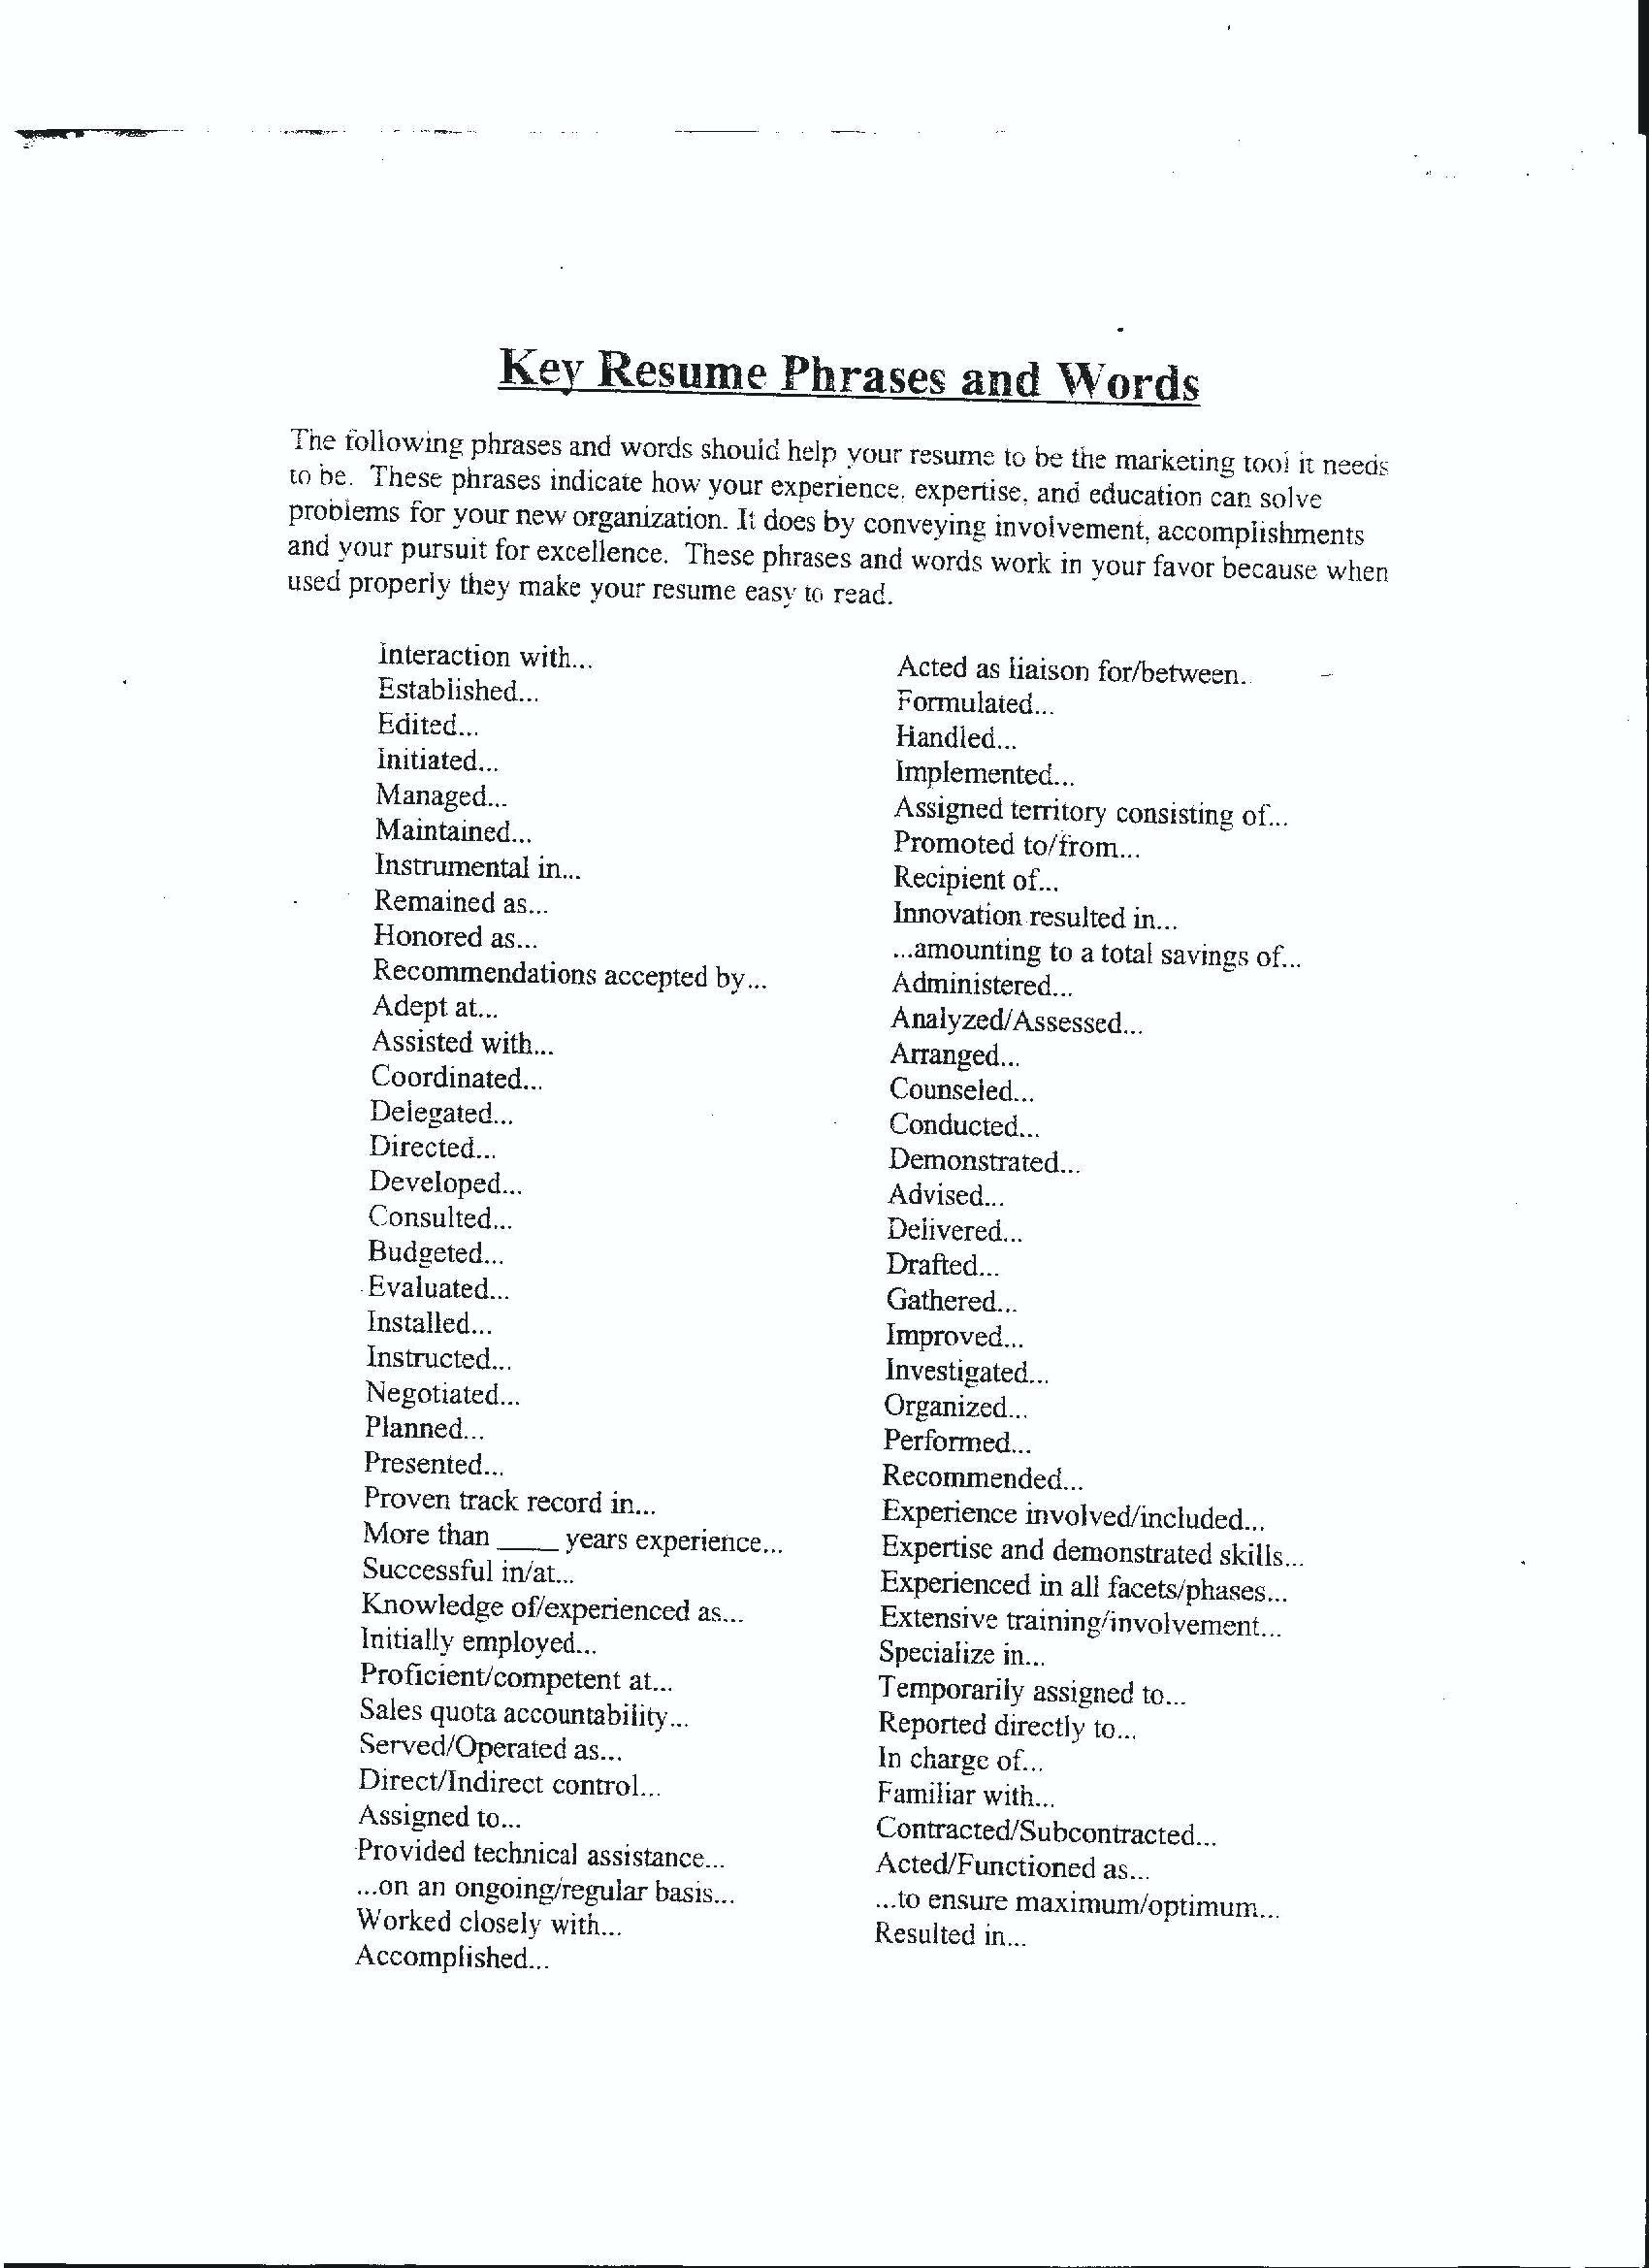 Action Words For Resume Be Words List Action Words List Resume Phrases And Words 1 Creative By Category Professional Cover Sight Words List For Kindergarten Printables action words for resume|wikiresume.com